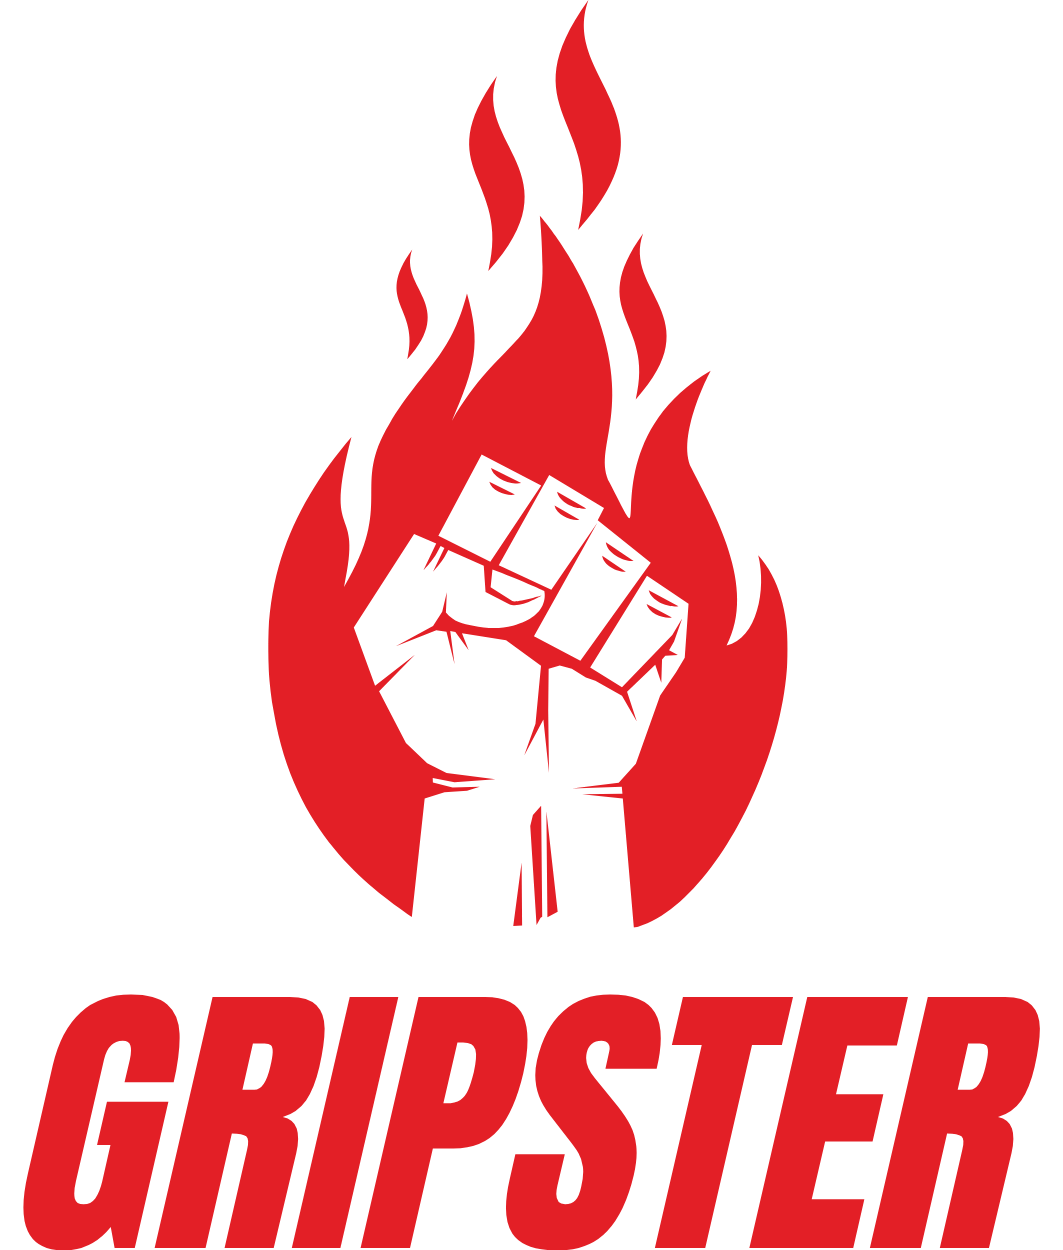 The Gripster